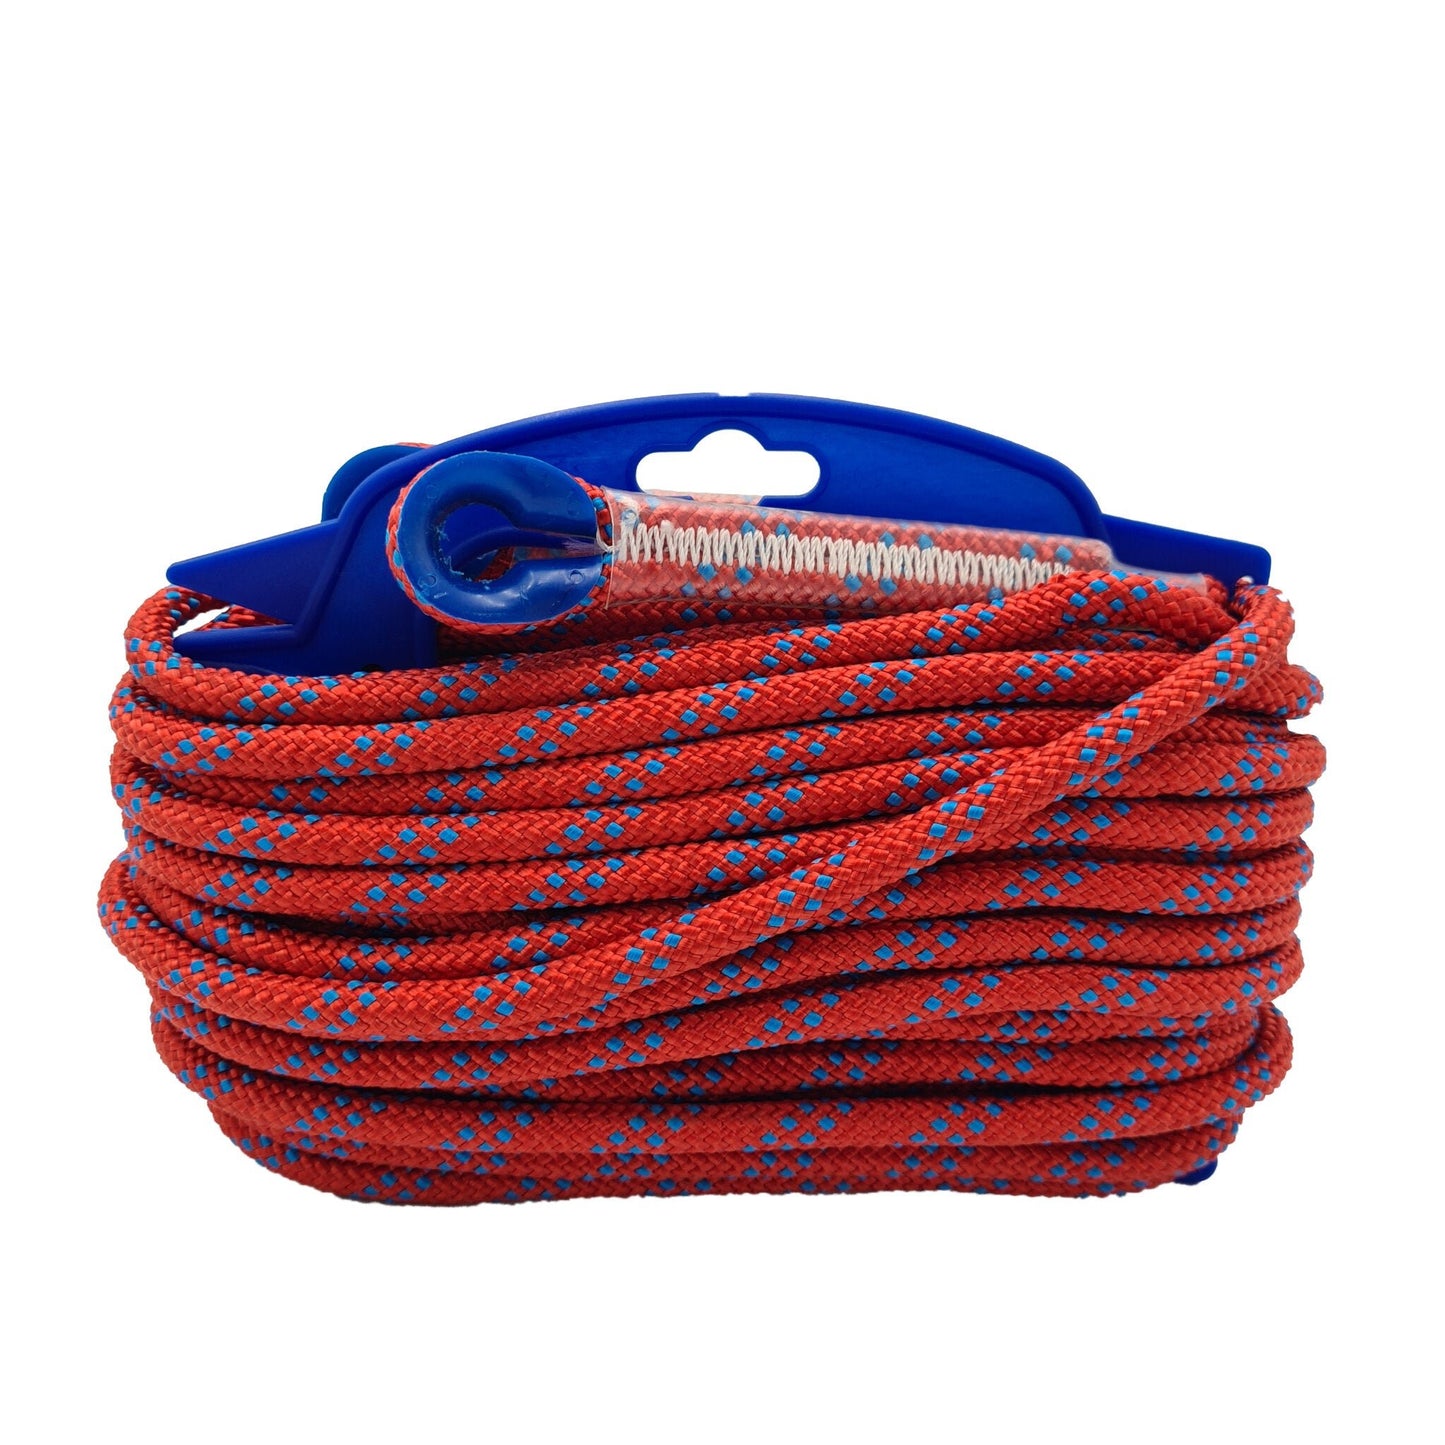 8mm Rope wrapped around rope organiser